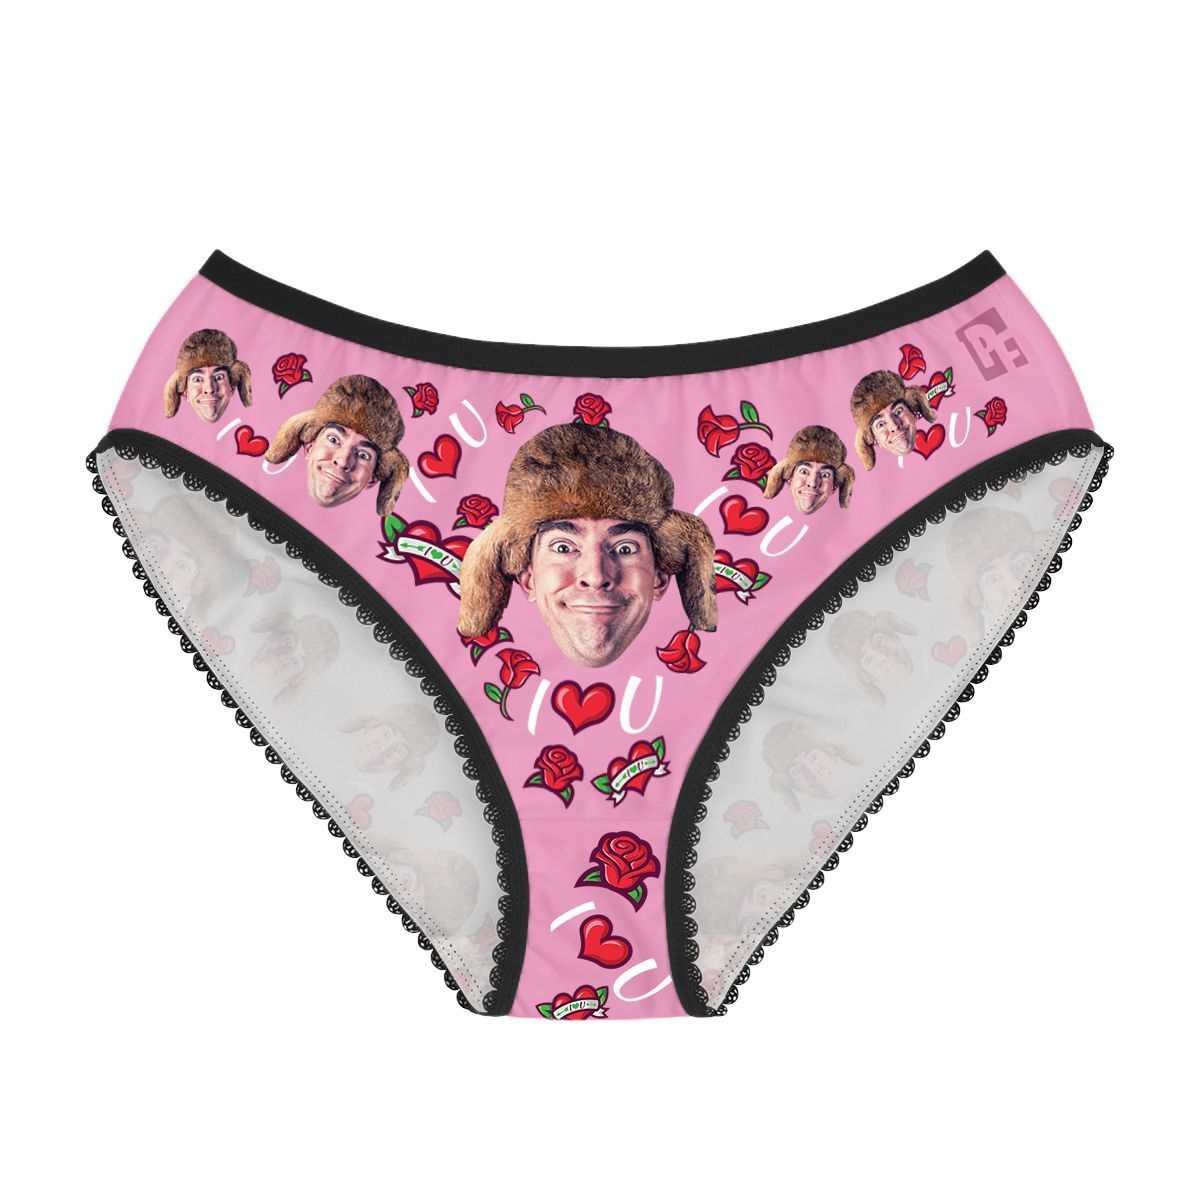 Pink Valentines women's underwear briefs personalized with photo printed on them